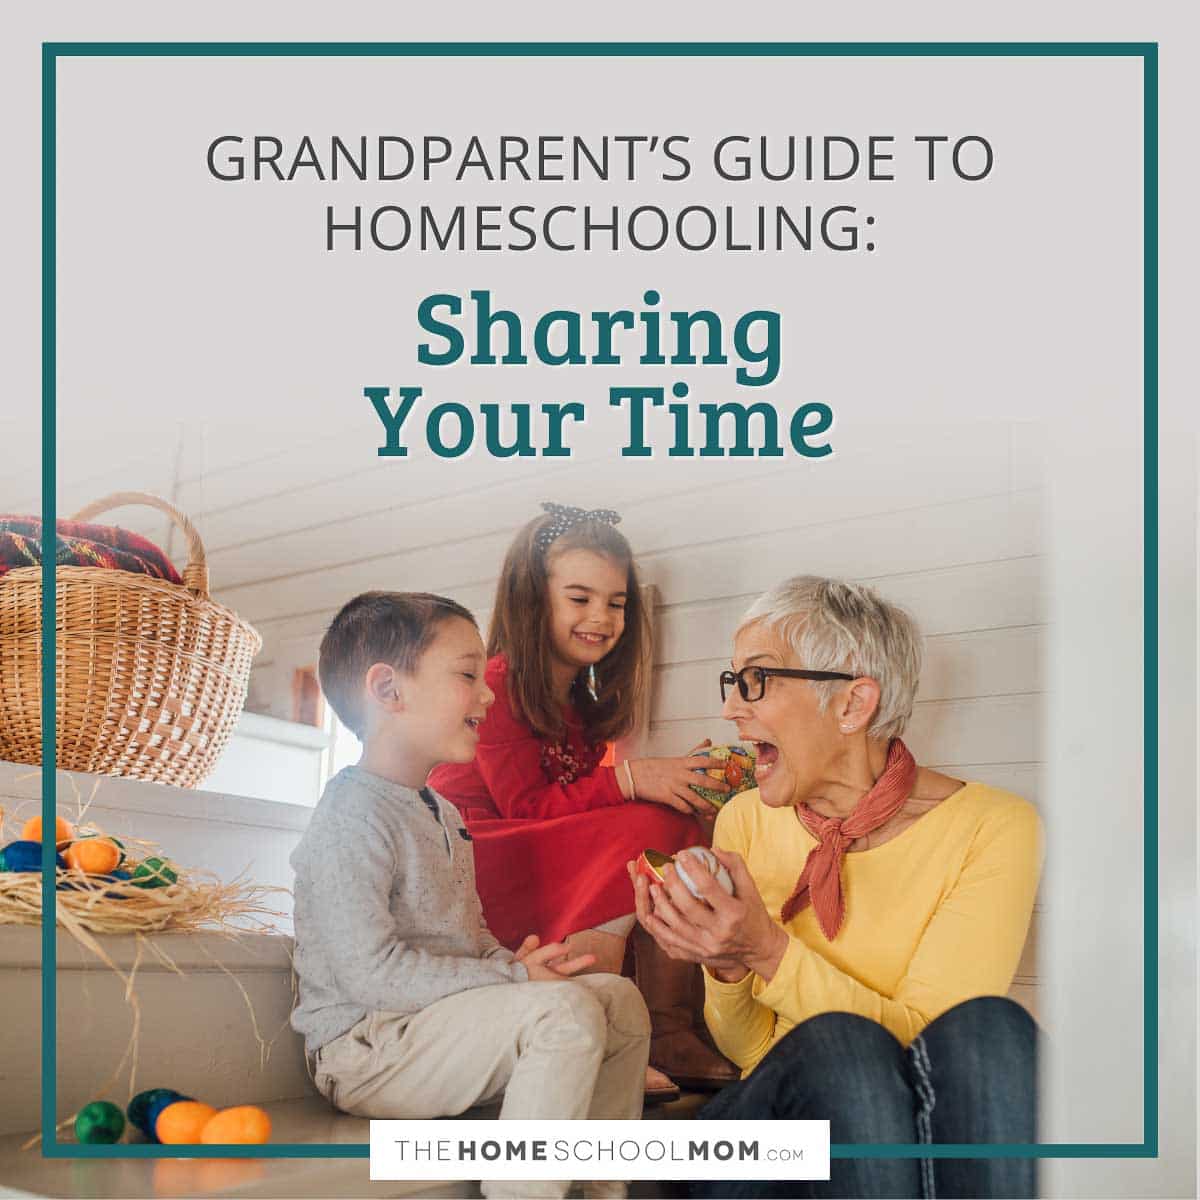 Grandparents' Guide to homeschooling: Sharing Your Time.